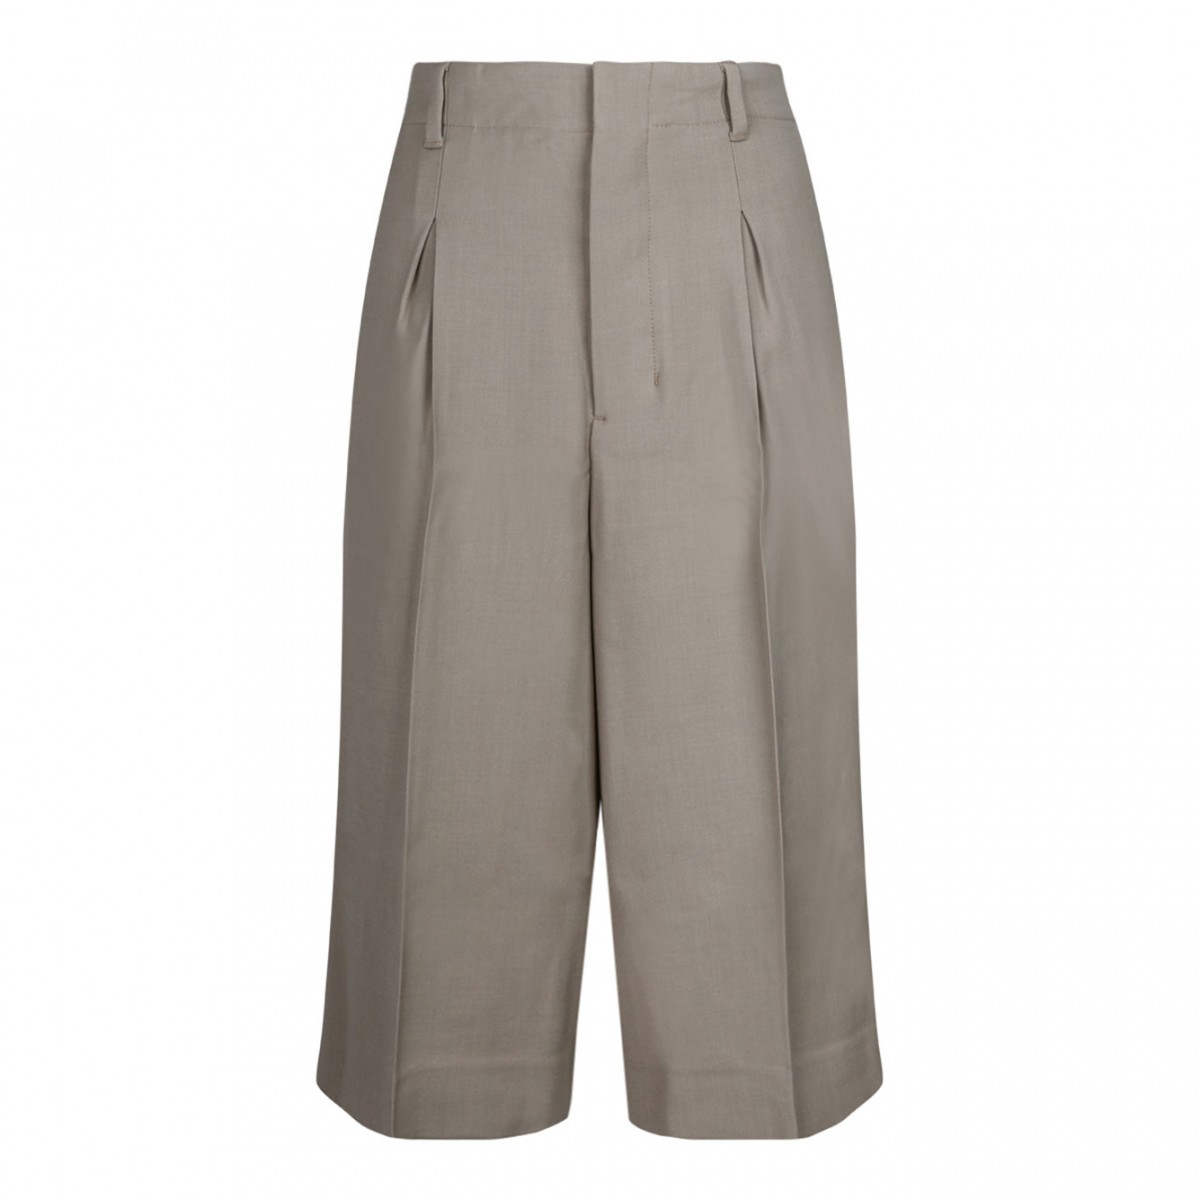 Light Taupe Tailored Knee Shorts